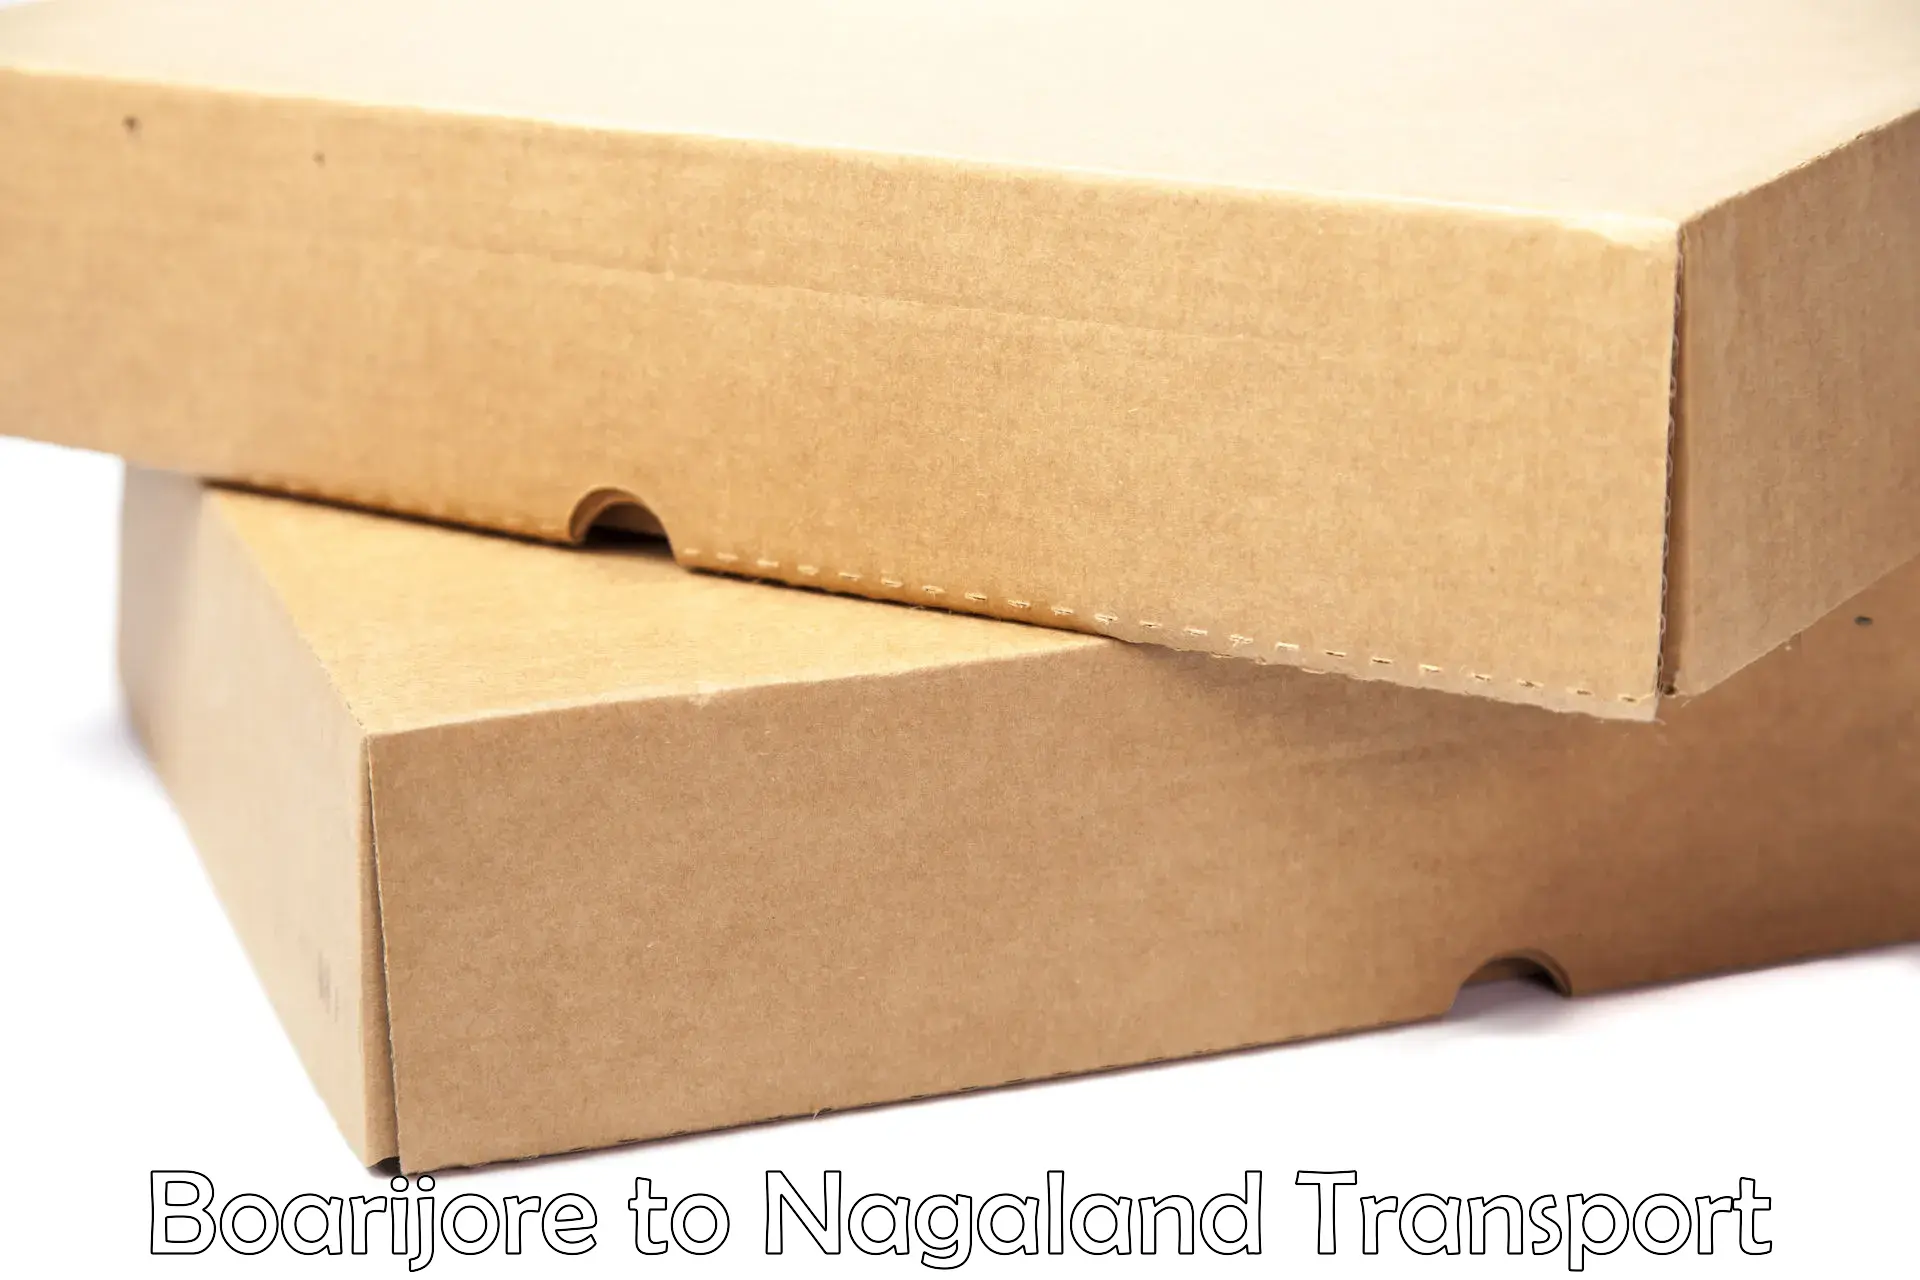 Air cargo transport services Boarijore to Nagaland